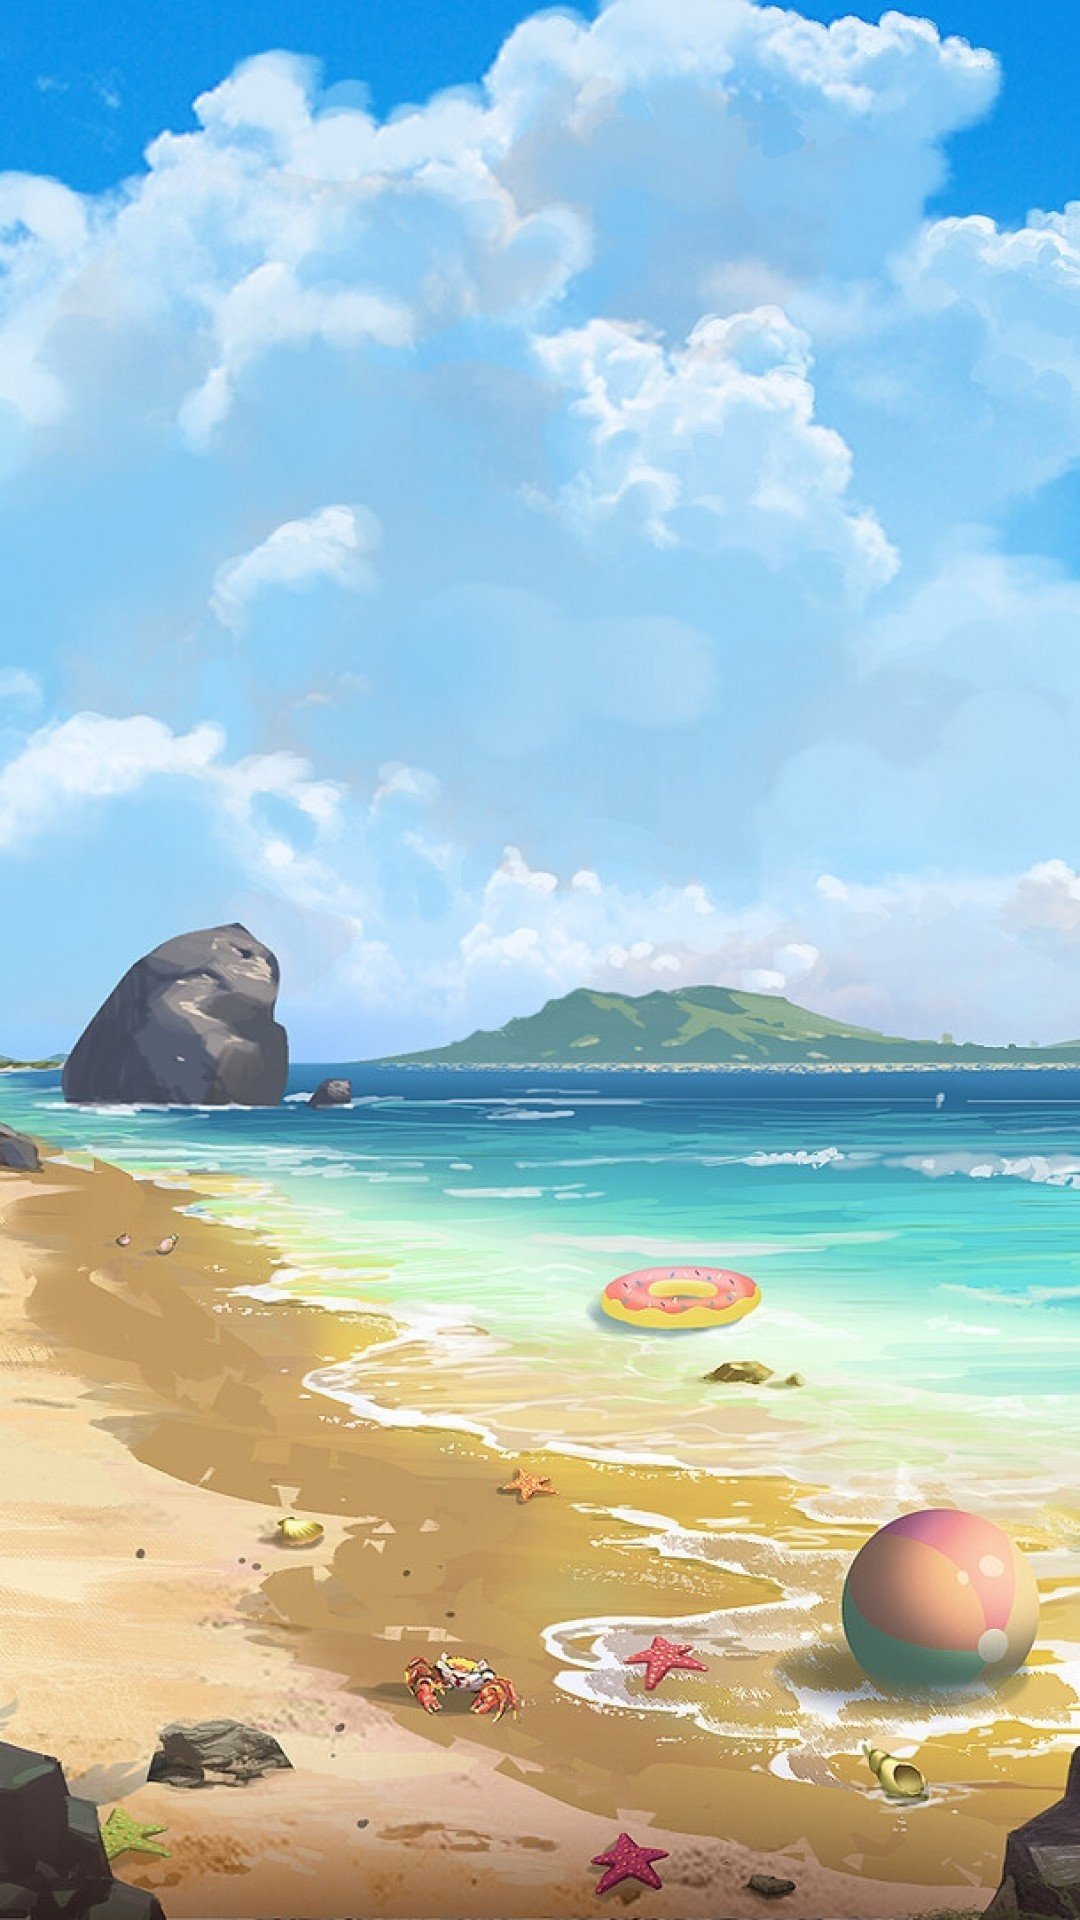 Share More Than Anime Beach Wallpaper In Cdgdbentre